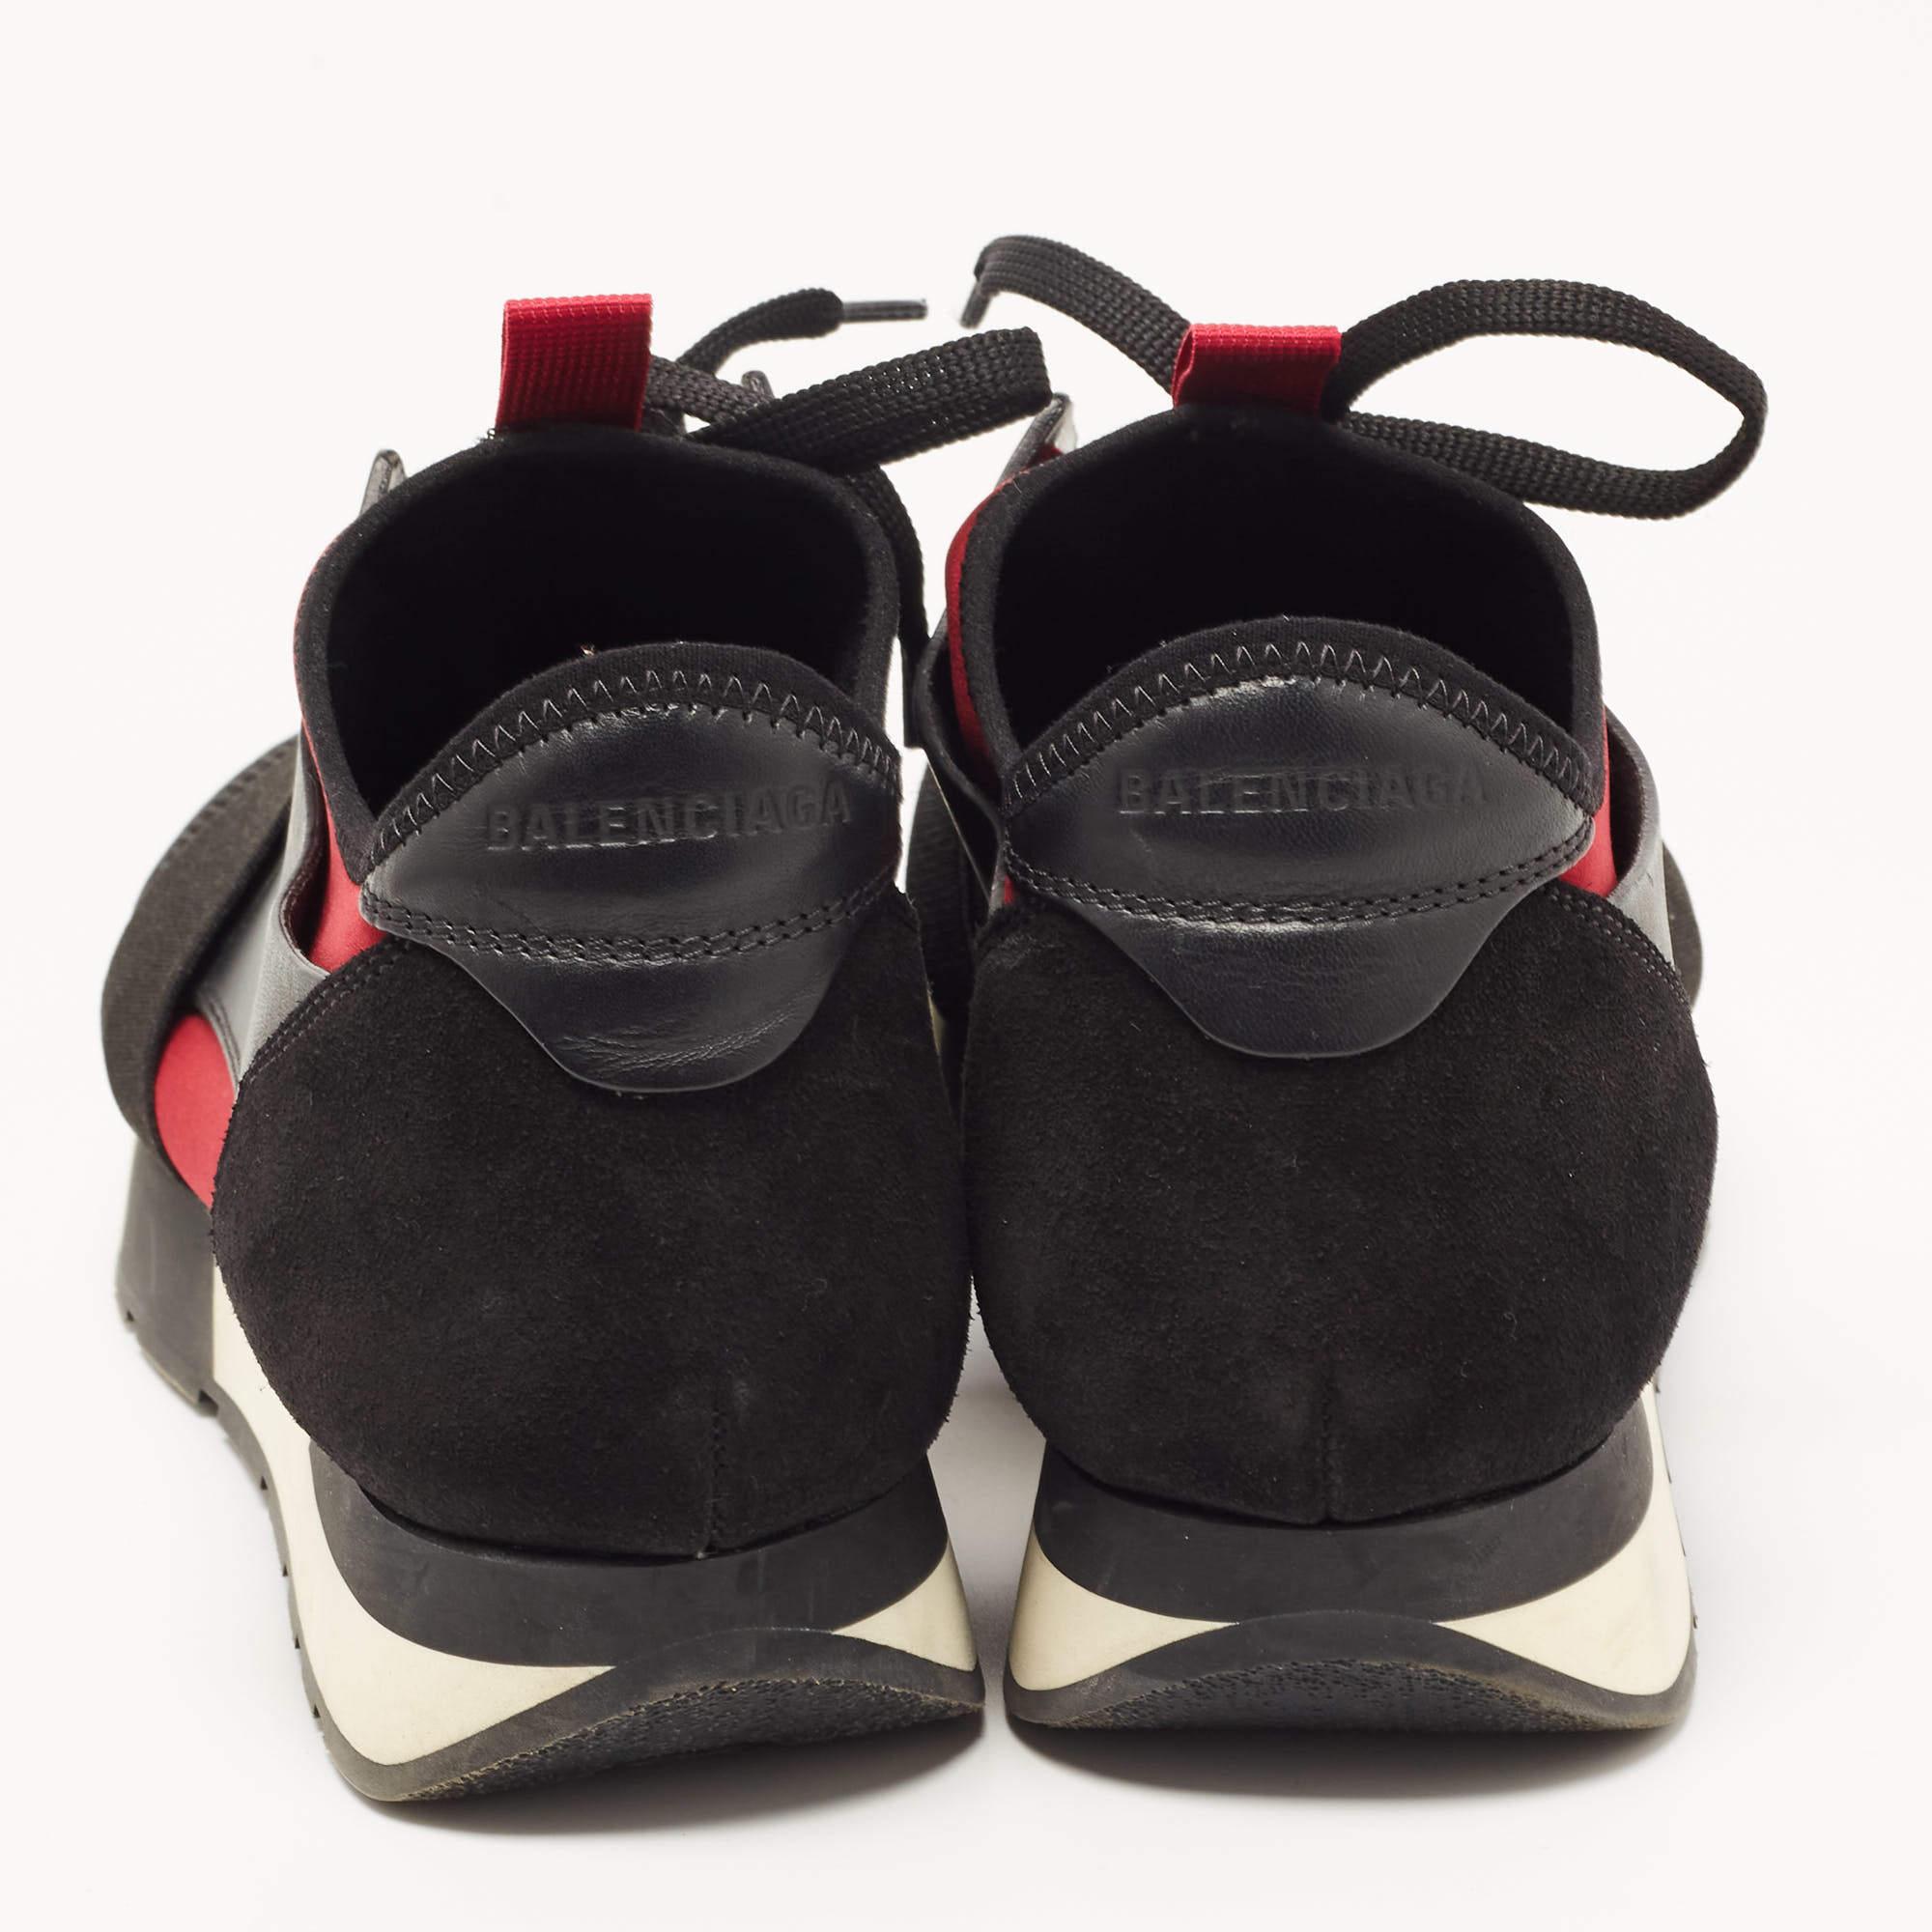 Sneakers from Balenciaga will fetch nothing but style, comfort, and relaxation to any look. Crafted from high-quality materials into a sturdy profile, these sneakers are the best pick to amp up any casual or leisure looks. Add them to your